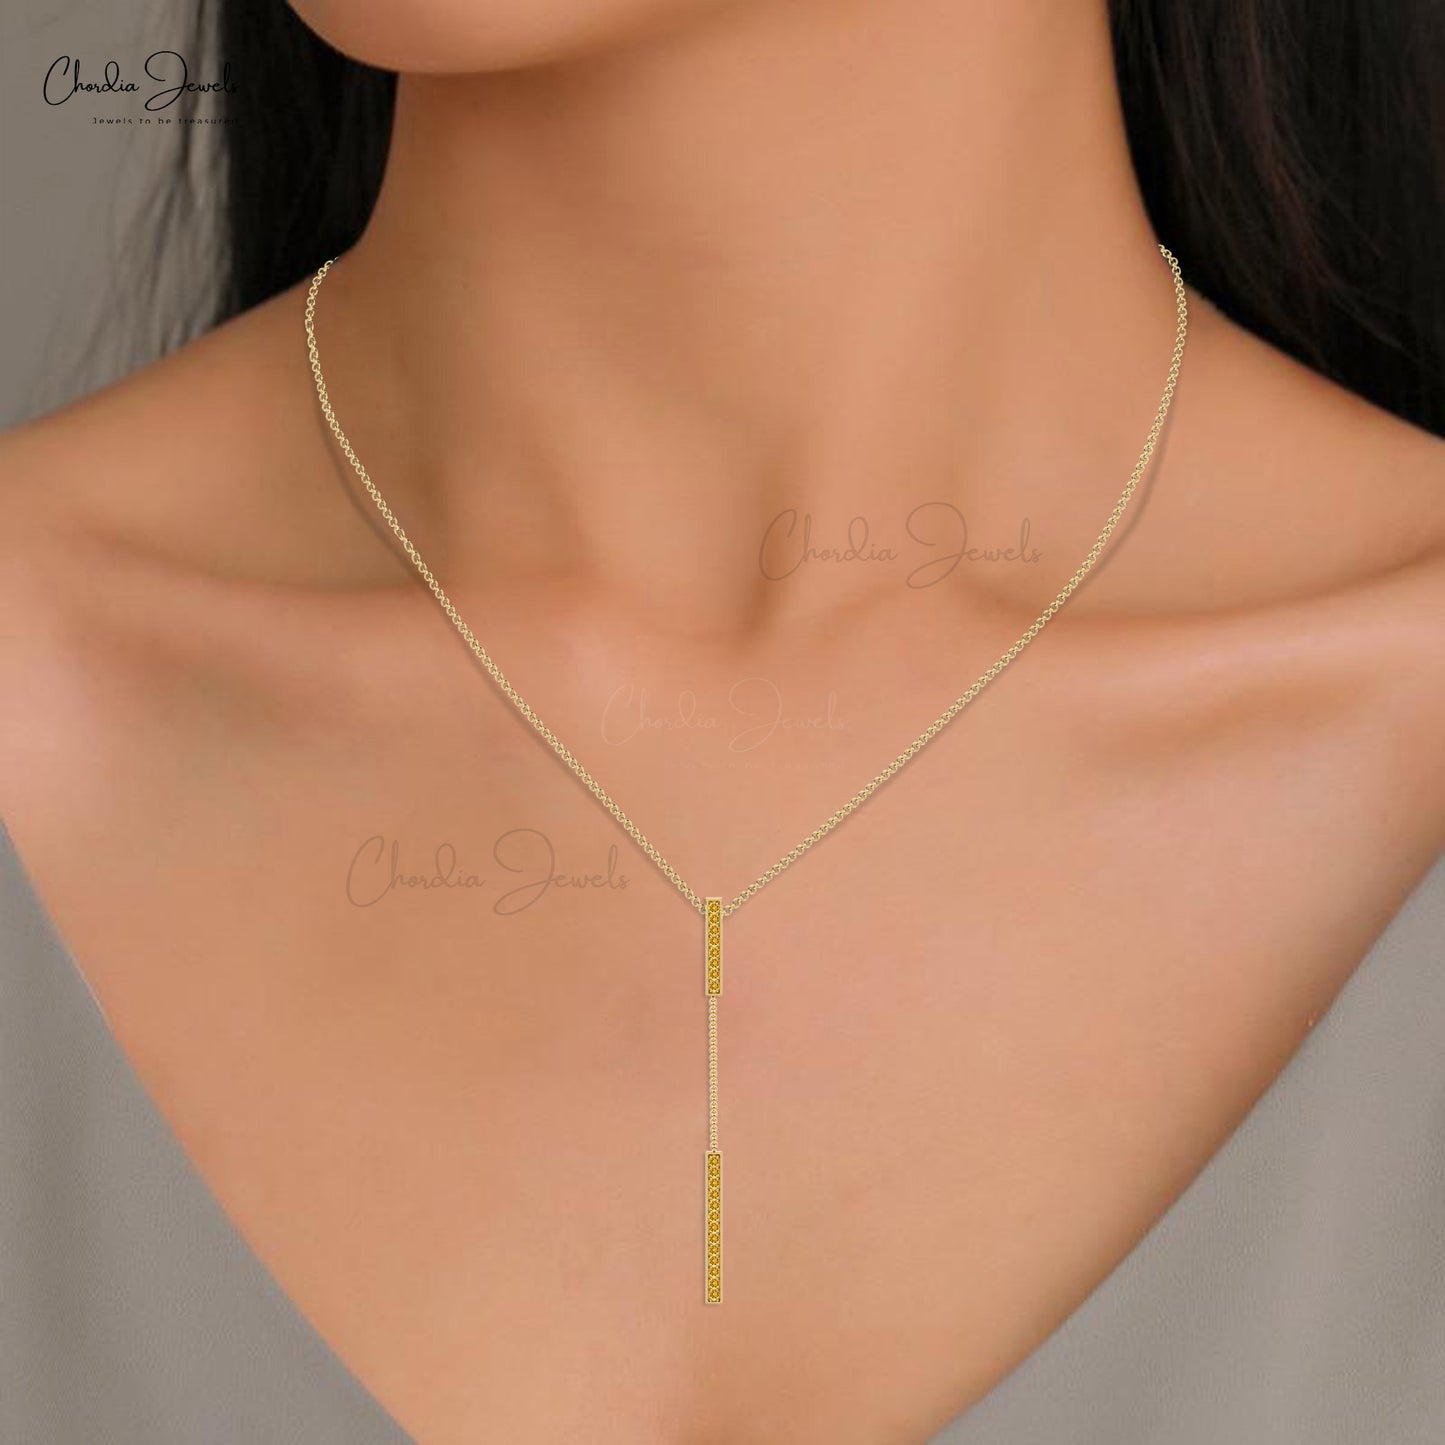 New Creative Genuine Yellow Citrine Drop Necklace Pendant November Birthstone Gemstone Lariat Charms Necklace 14k Real Gold Dainty Jewelry For Gift